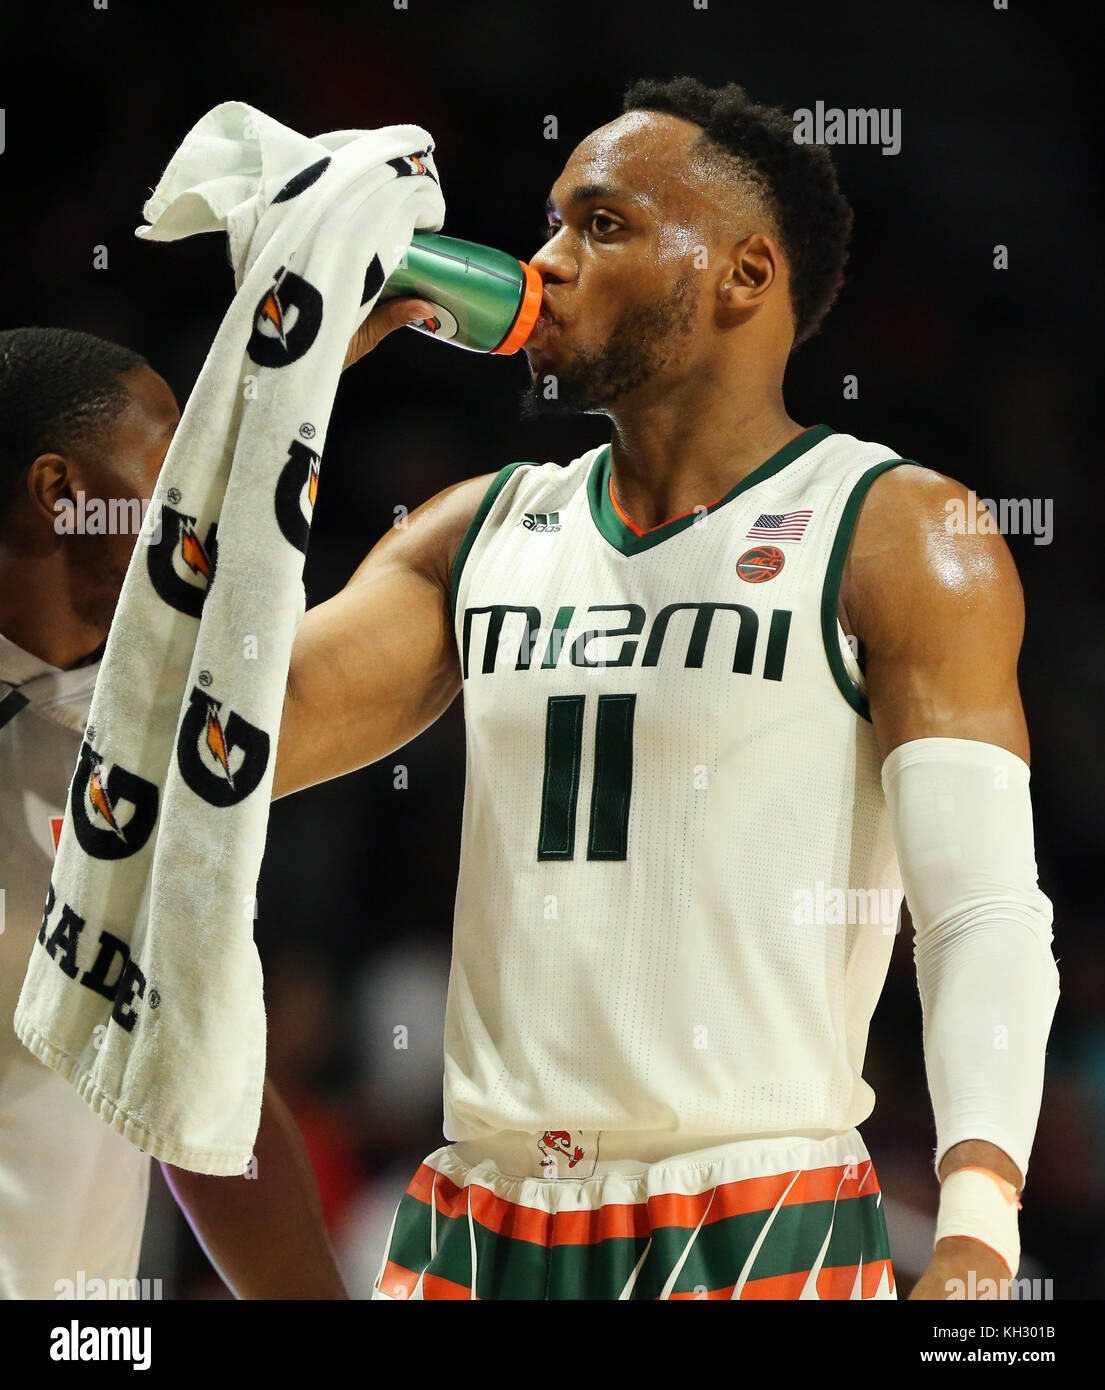 November 10, 2017: Miami Hurricanes guard Bruce Brown Jr. (11) during the  NCAA men's basketball game between the Gardner-Webb Bulldogs and the  University of Miami Hurricanes at the Watsco Center in Coral